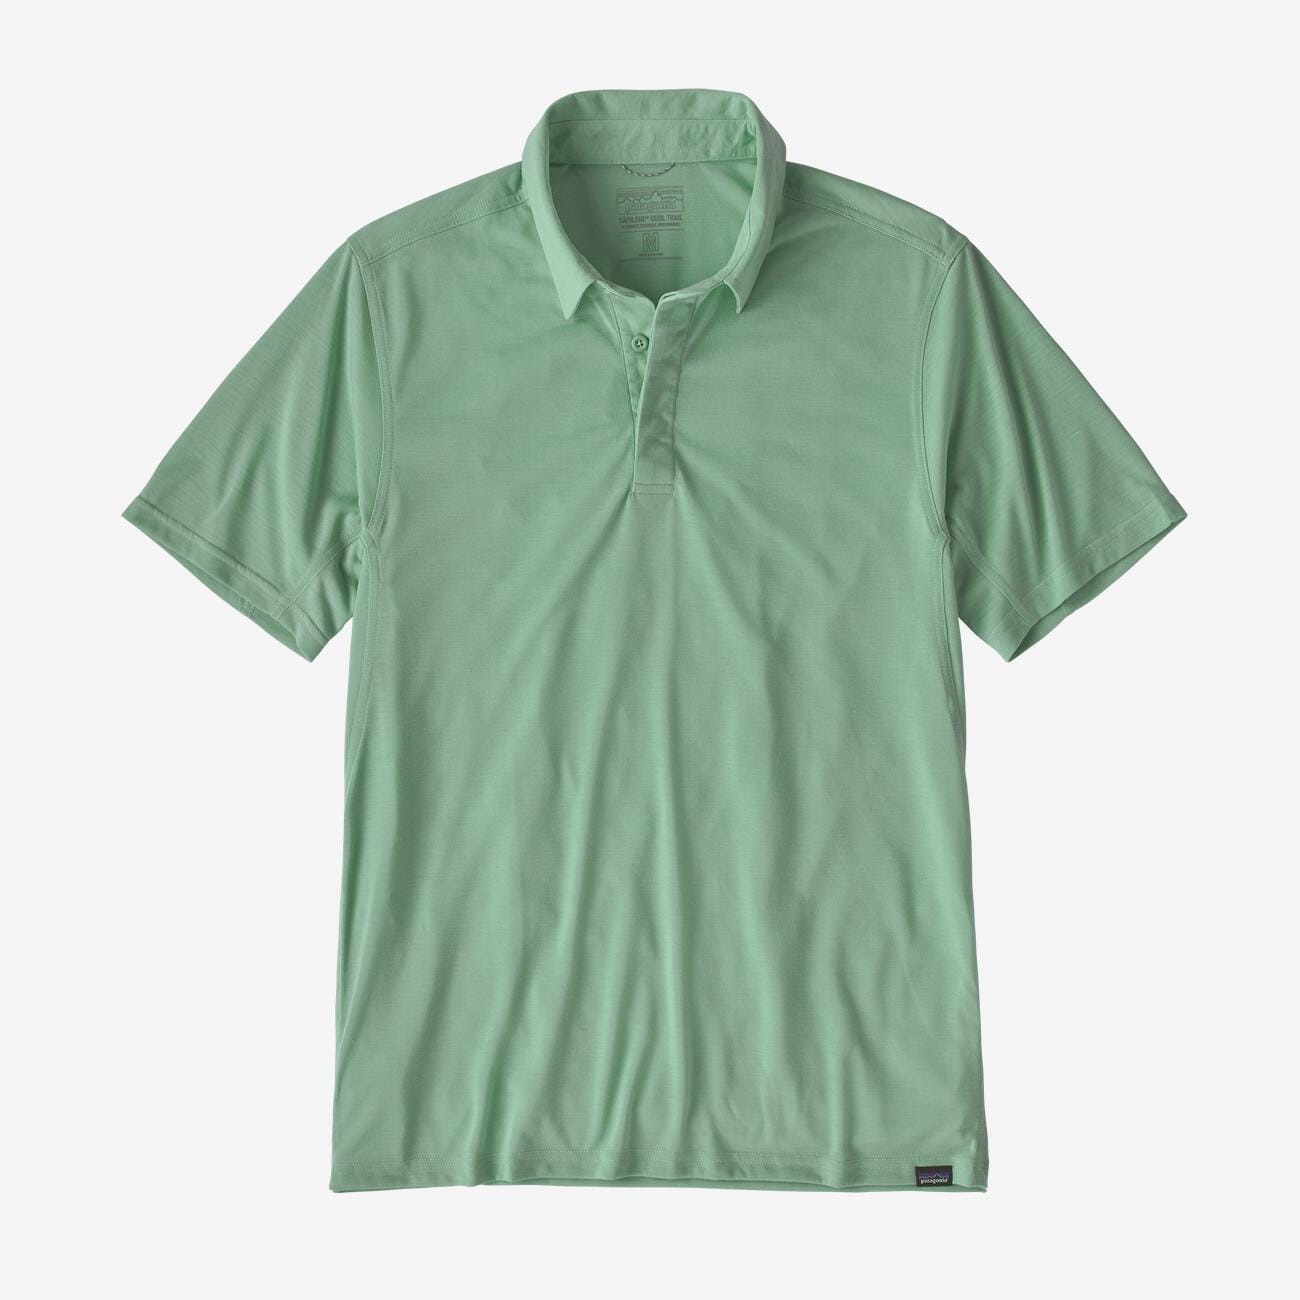 Patagonia green polo - ポロシャツ